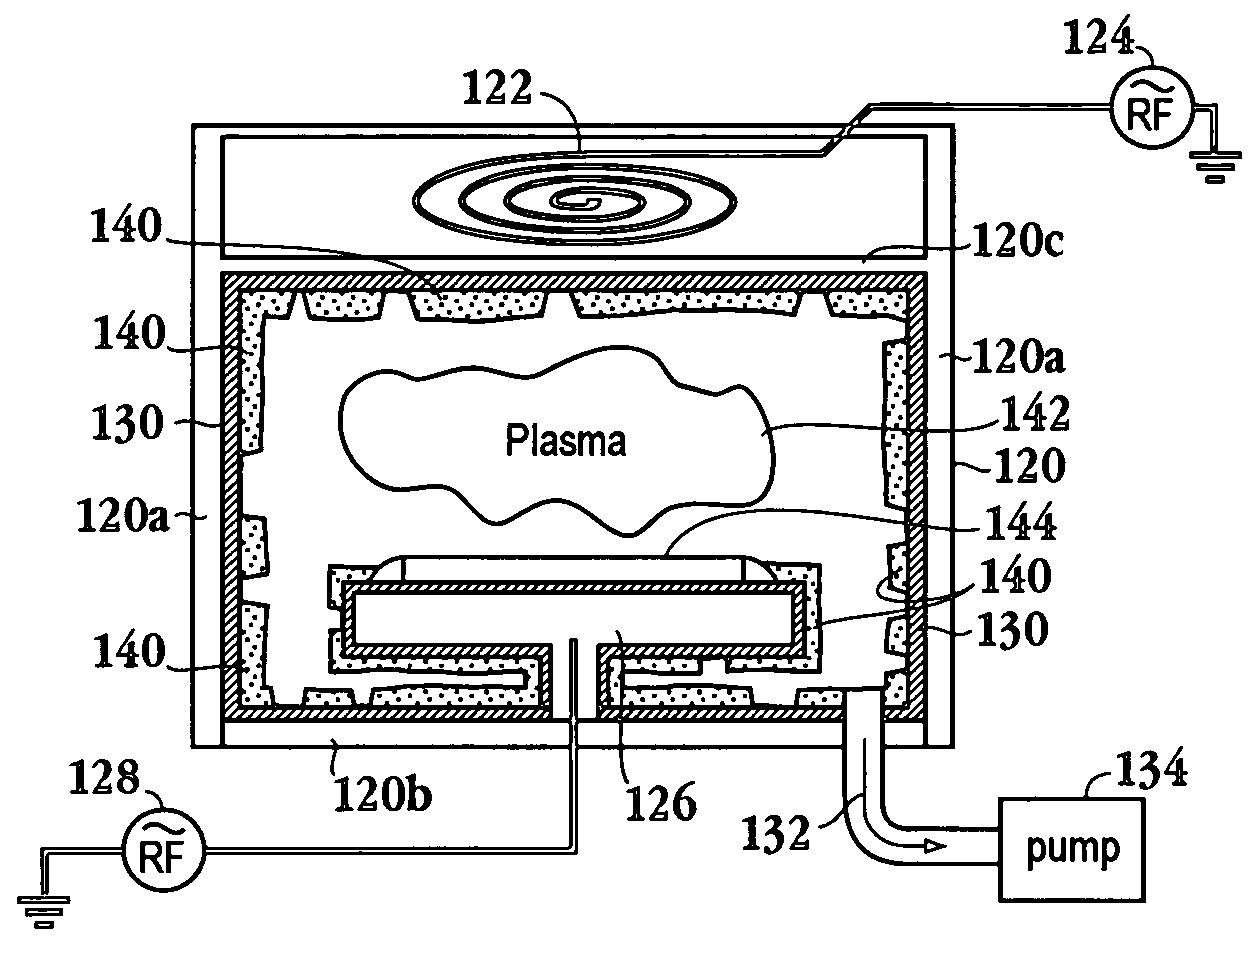 In-situ pre-coating of plasma etch chamber for improved productivity and chamber condition control